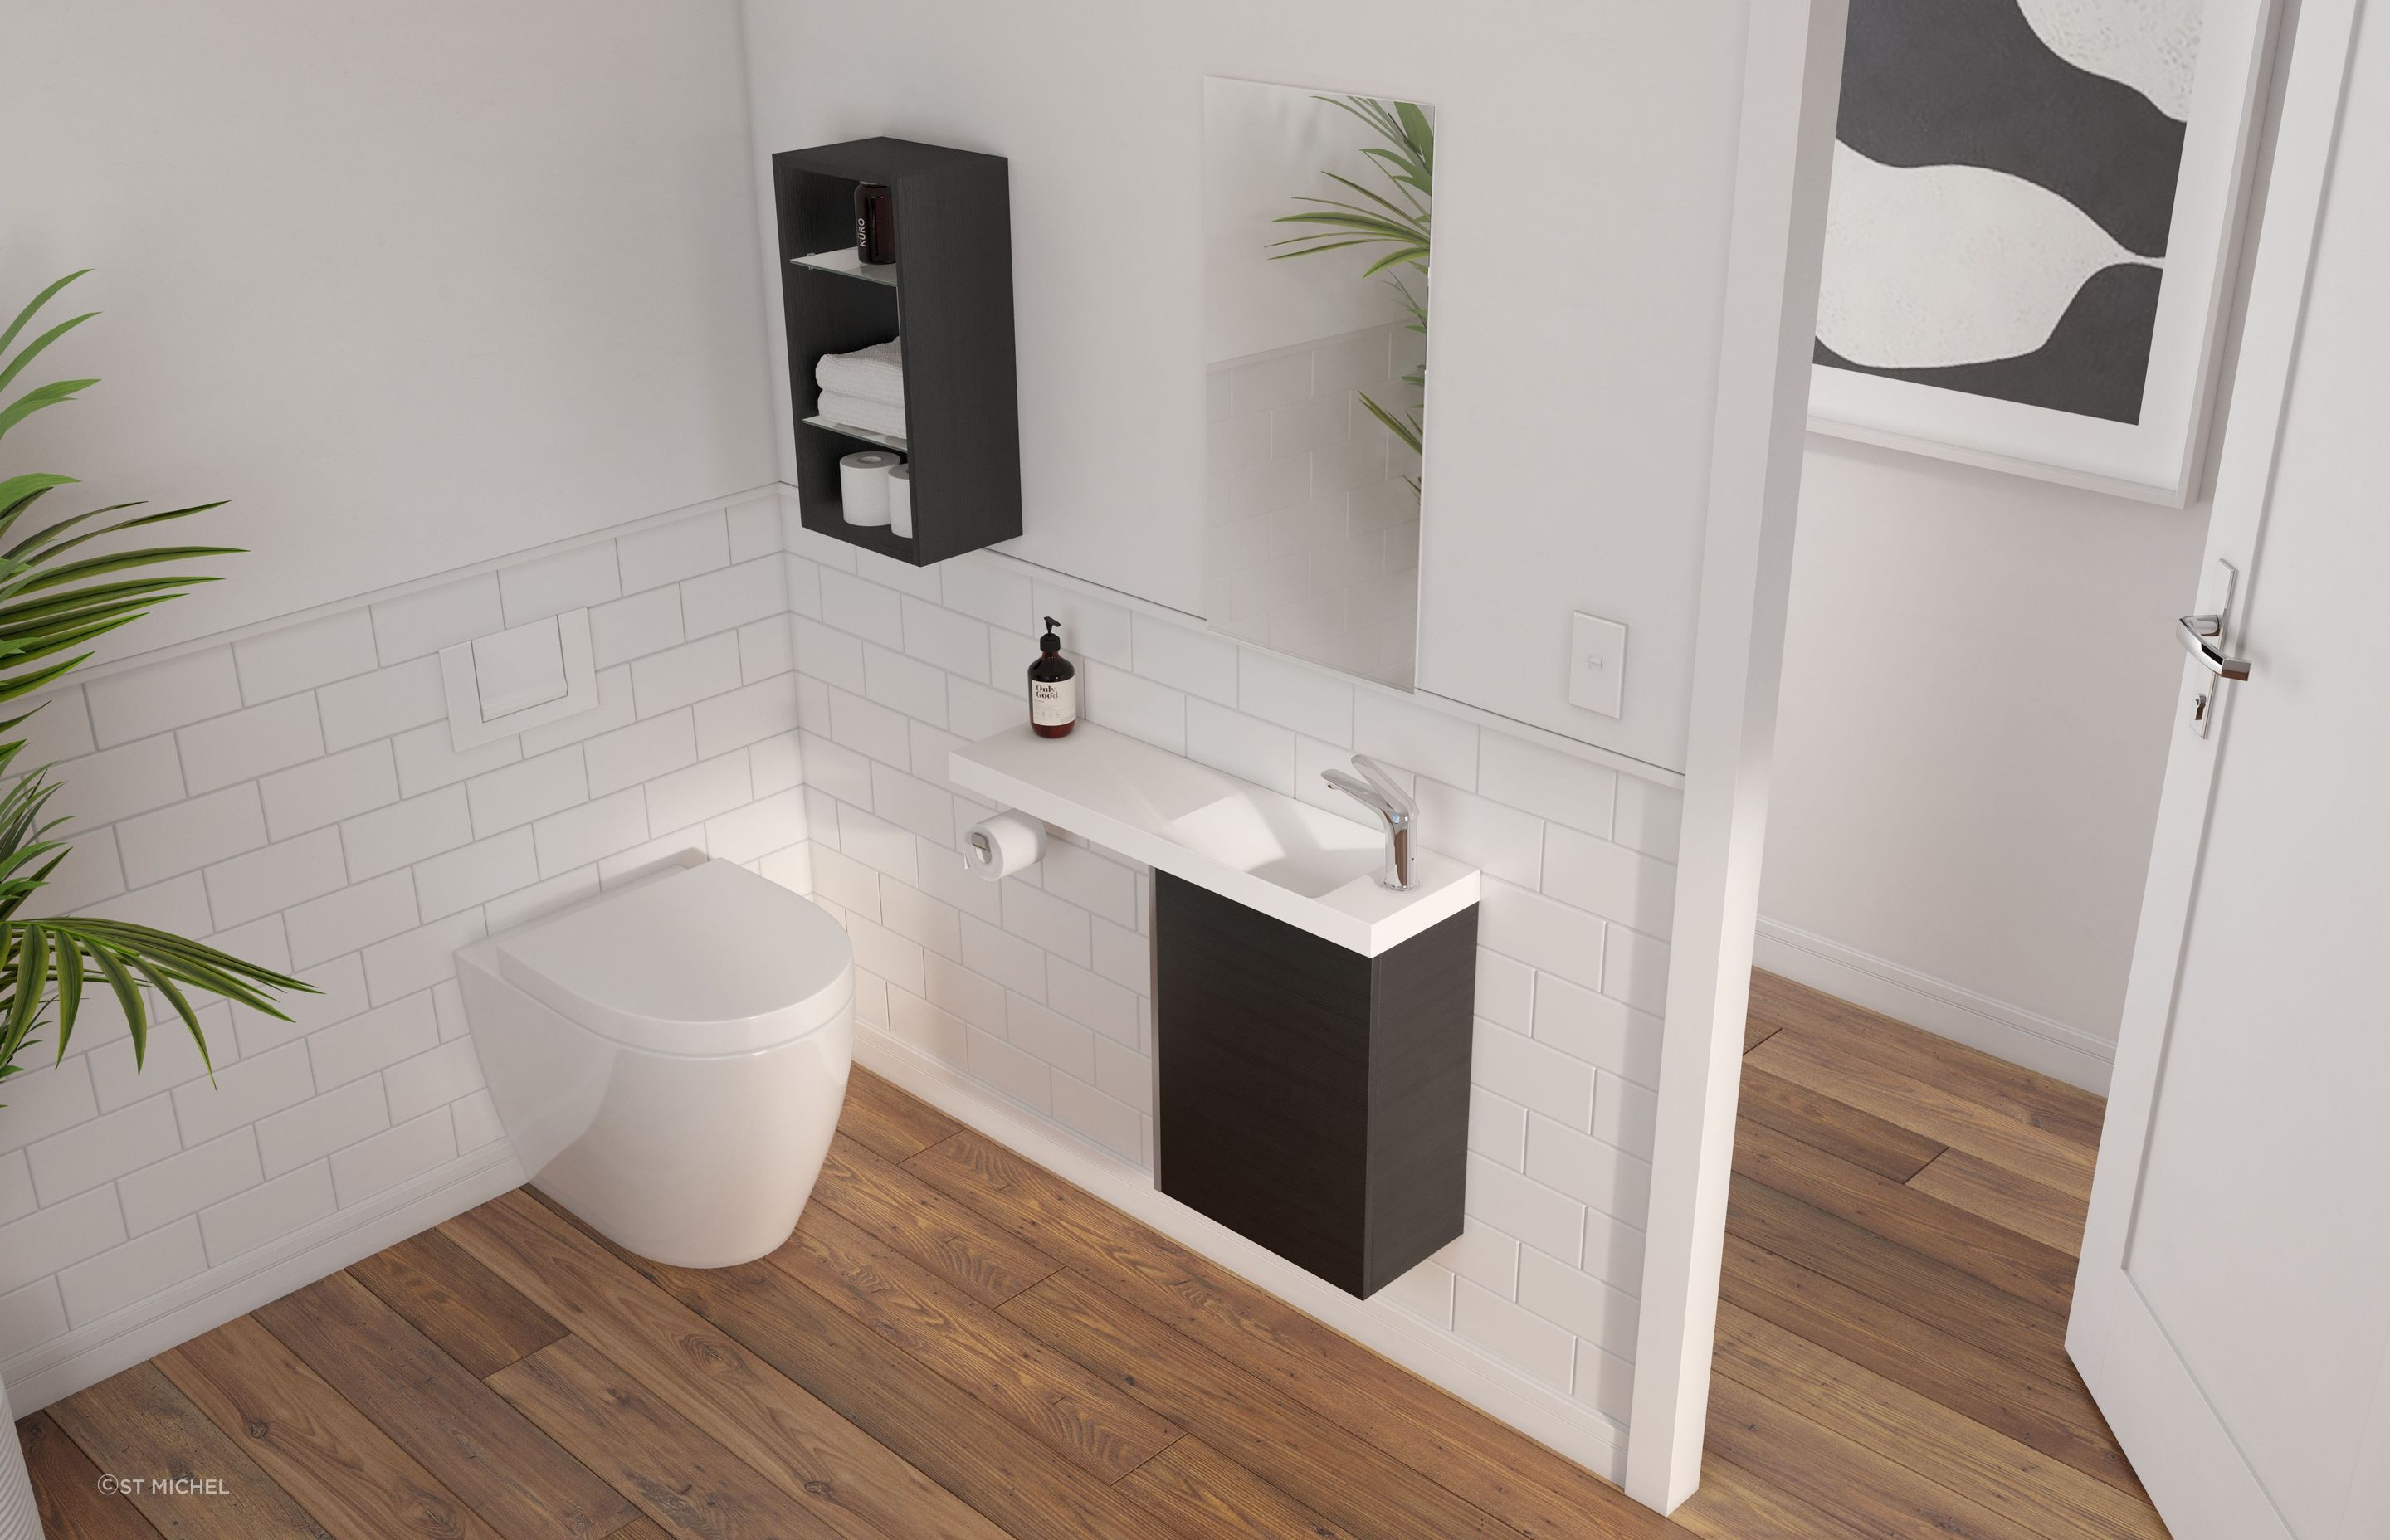 The Mini-B Vanity shows that size doesn't always matter.